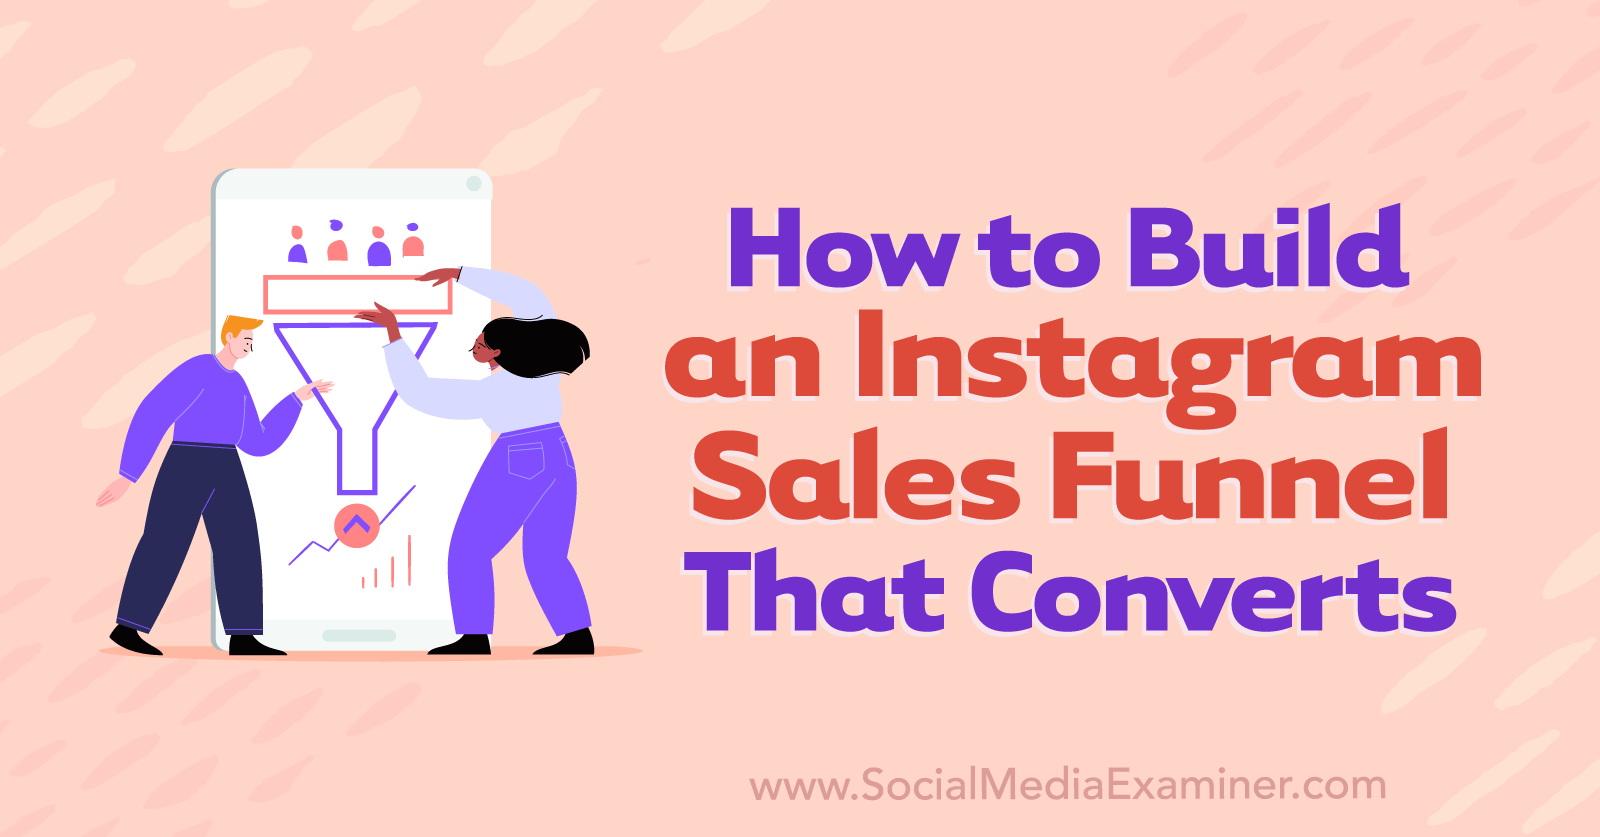 How to Build an Instagram Sales Funnel That Converts by Anna Sonnenberg